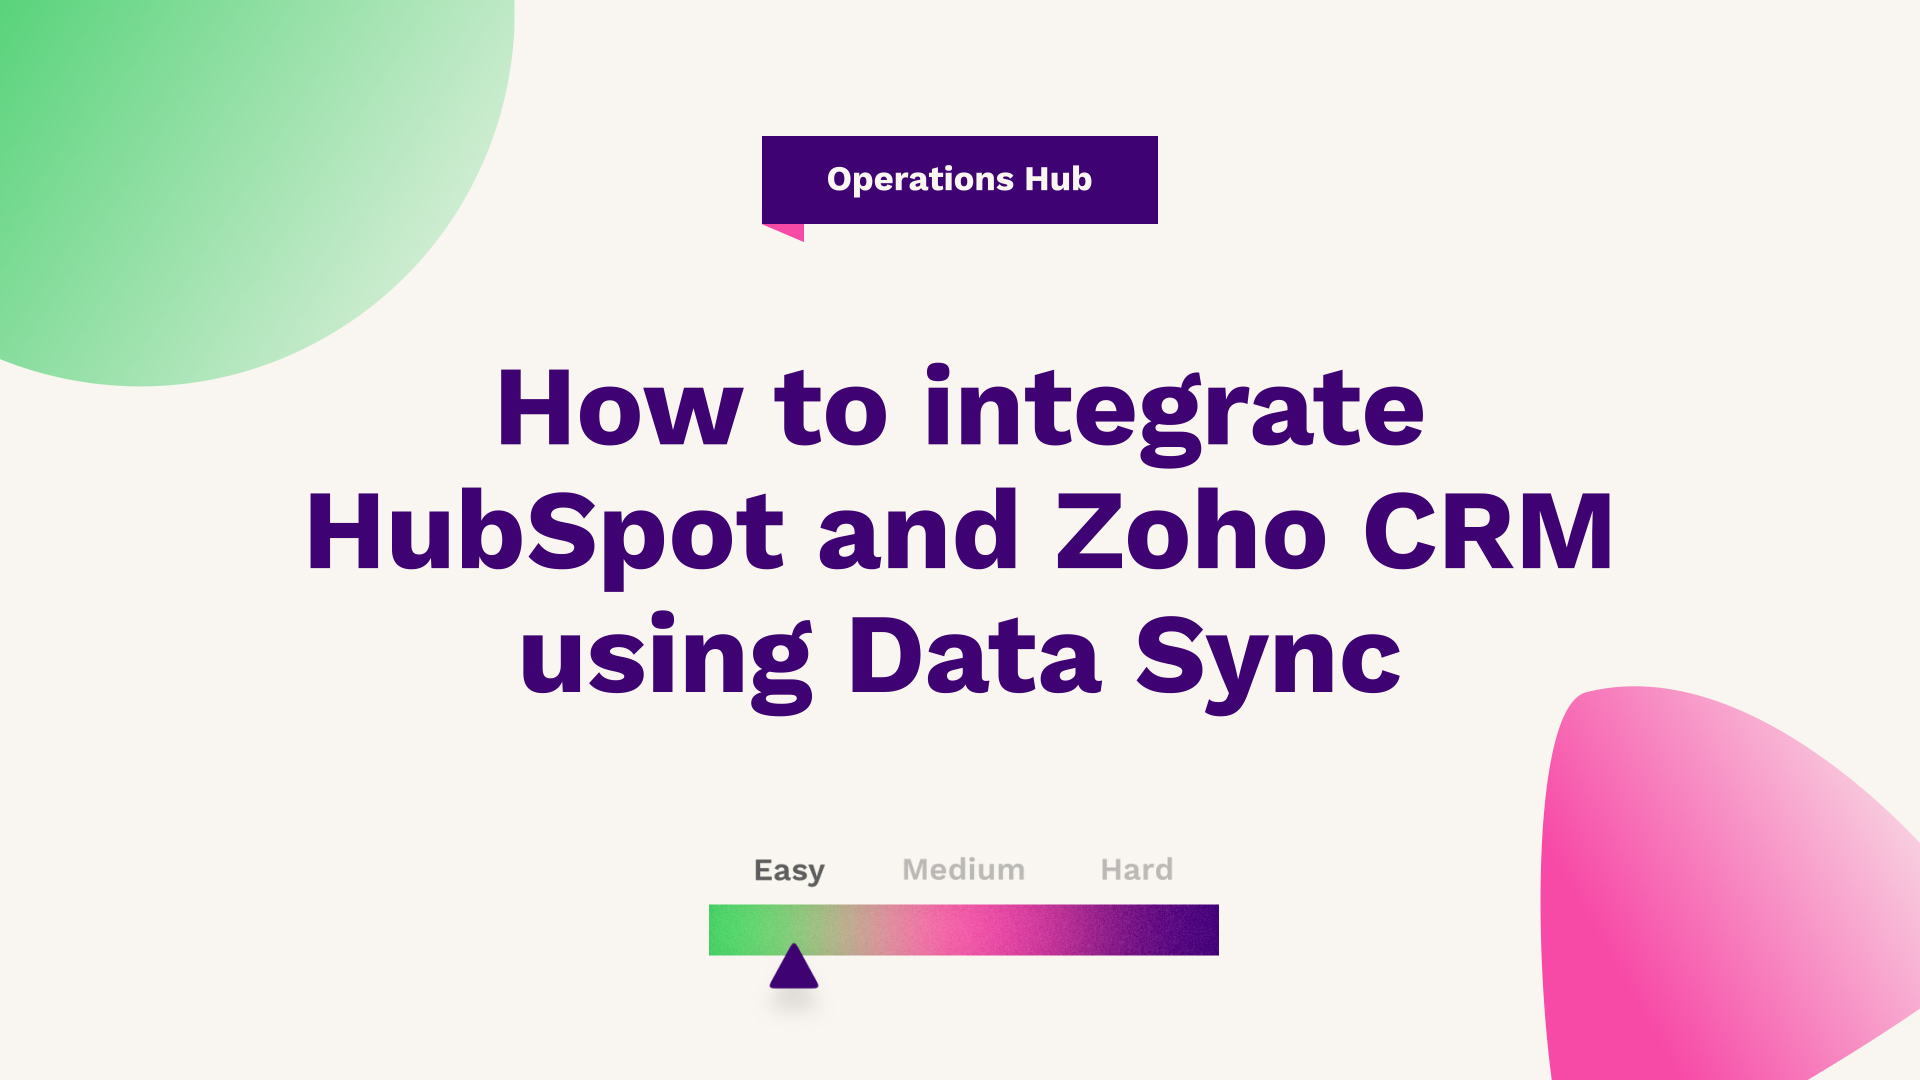 How to integrate HubSpot and Zoho CRM using Data Sync